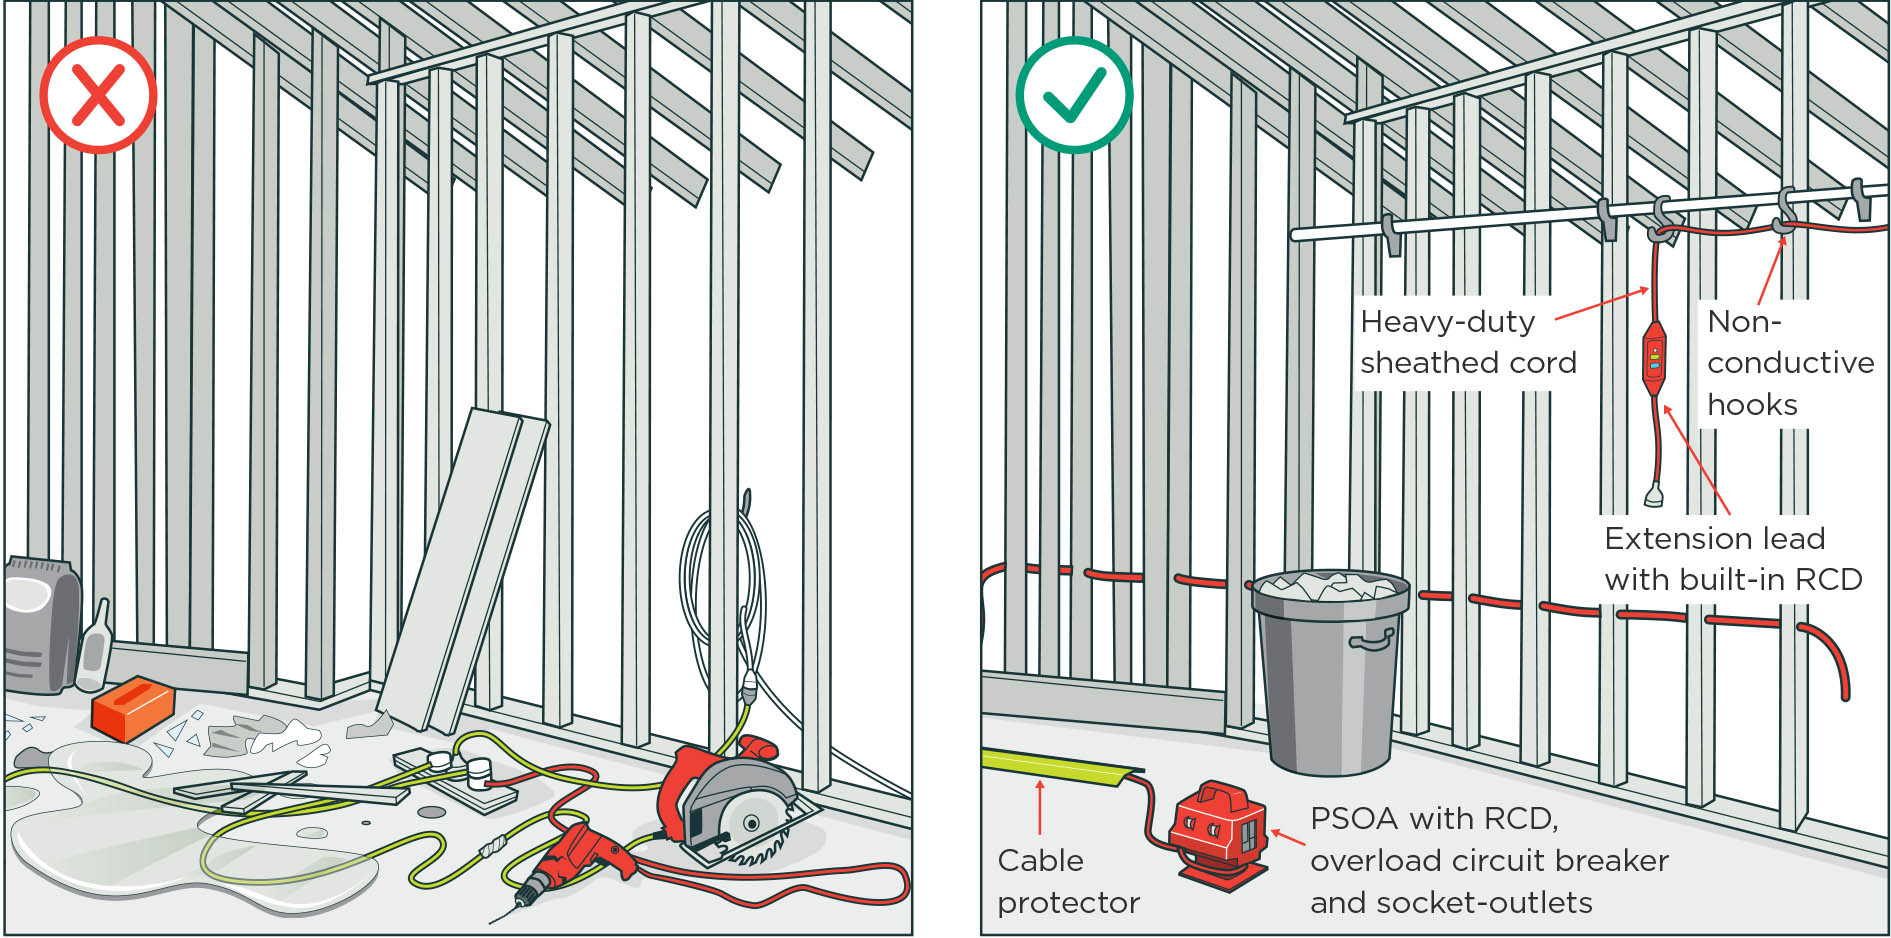 [image] two construction sites being compared, one has cords across the floor and a red cross and the other has cords on hooks and a green tick